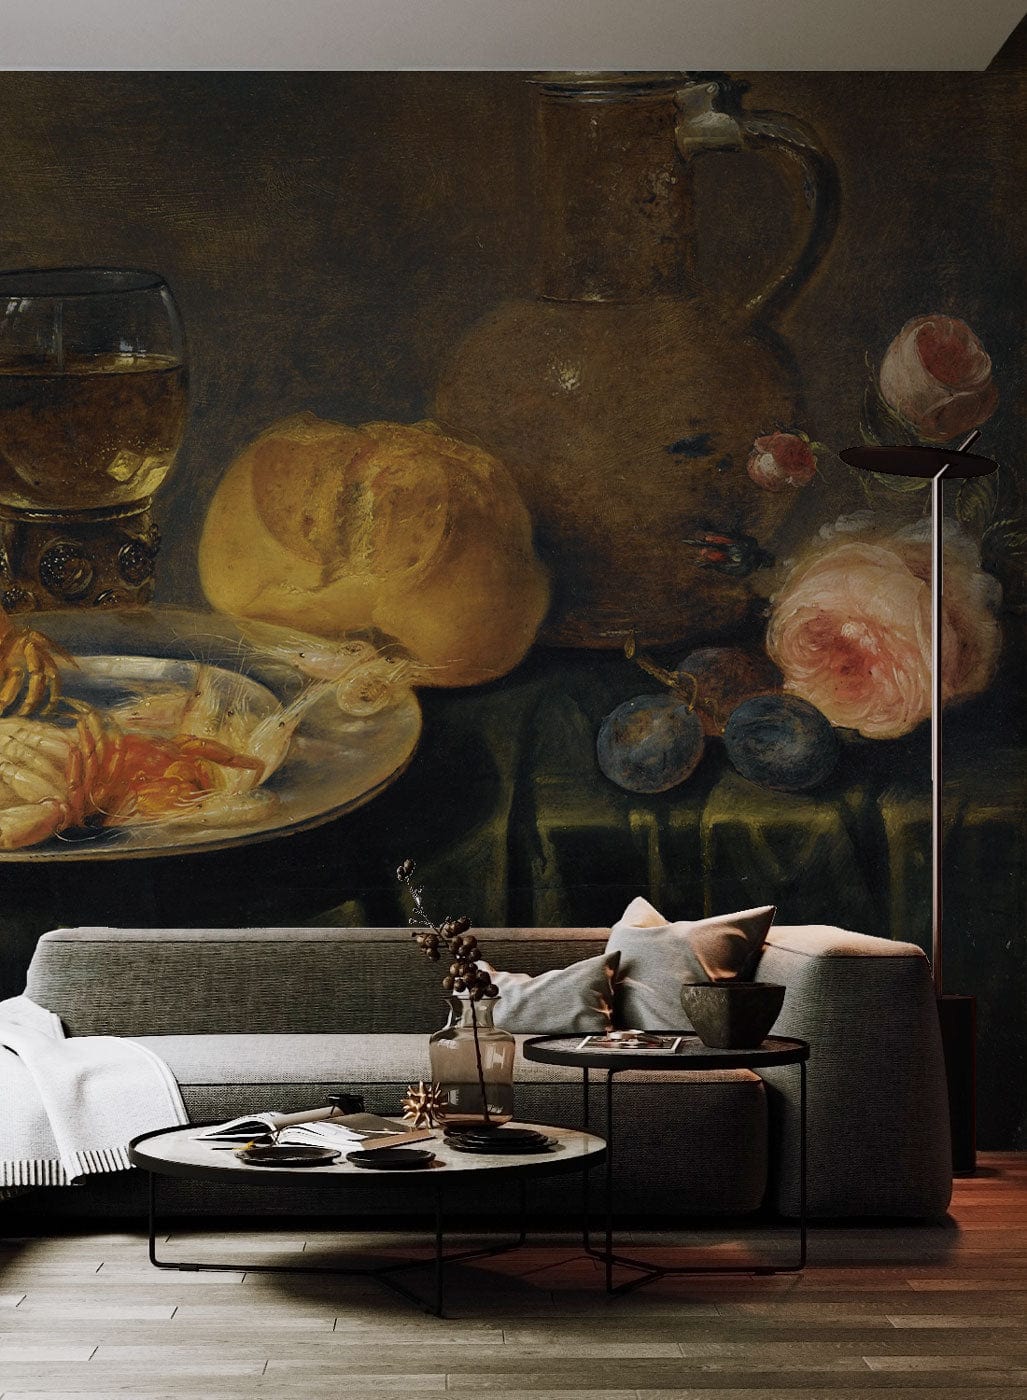 Painting and Wallpaper Mural by Alexander Adriaenessen for the Decoration of the Living Room